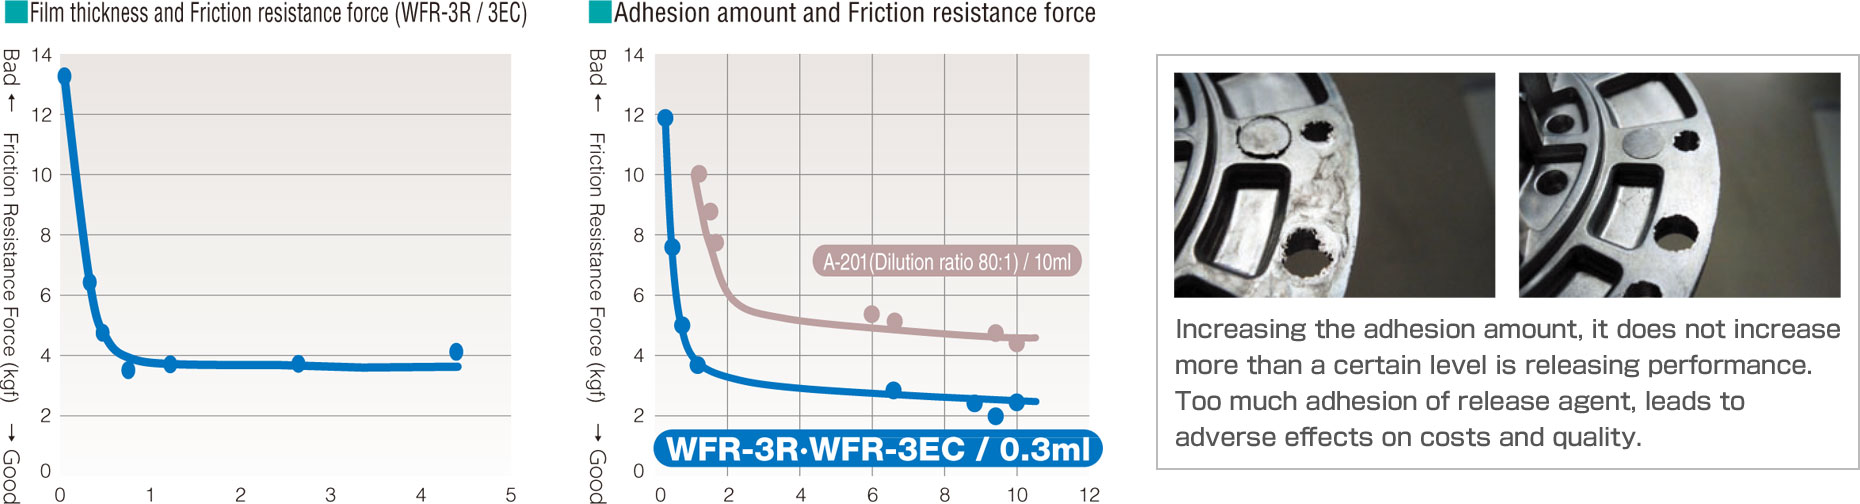 Film thickness and Friction resistance force (WFR-3R/3EC)